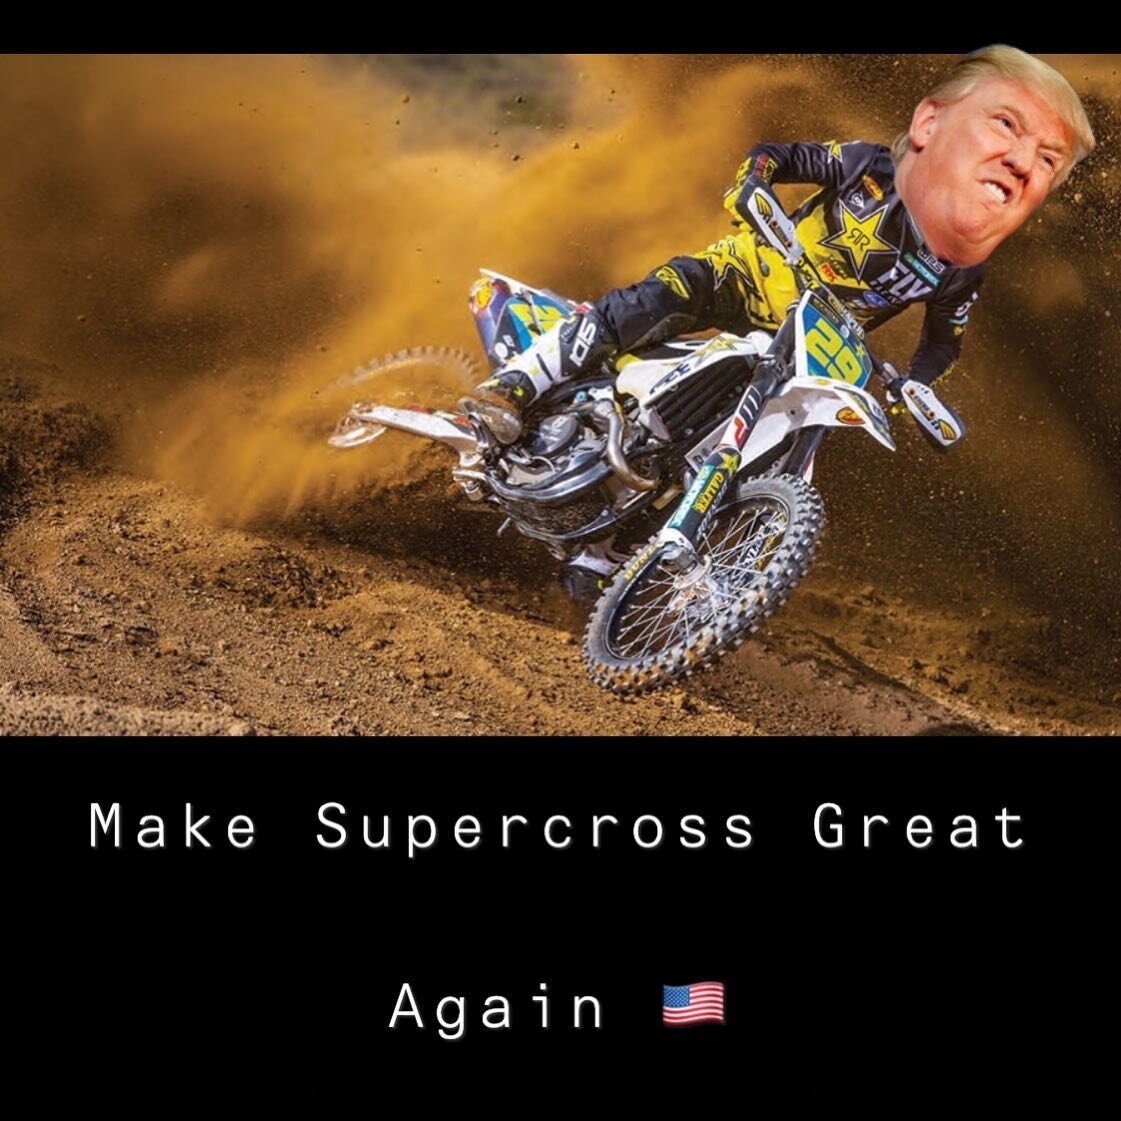 Happy Presidents day ! Roost of the day goes out to @therealdonaldtrump20 😆
.
.
.
#presidentsday #trump2020 #trumpmemes #trumpsupporters #trumptrain #trump2020🇺🇸 #motocross #supercross #picoftheday #instagood #photooftheday #fashion #happy #dirtbi